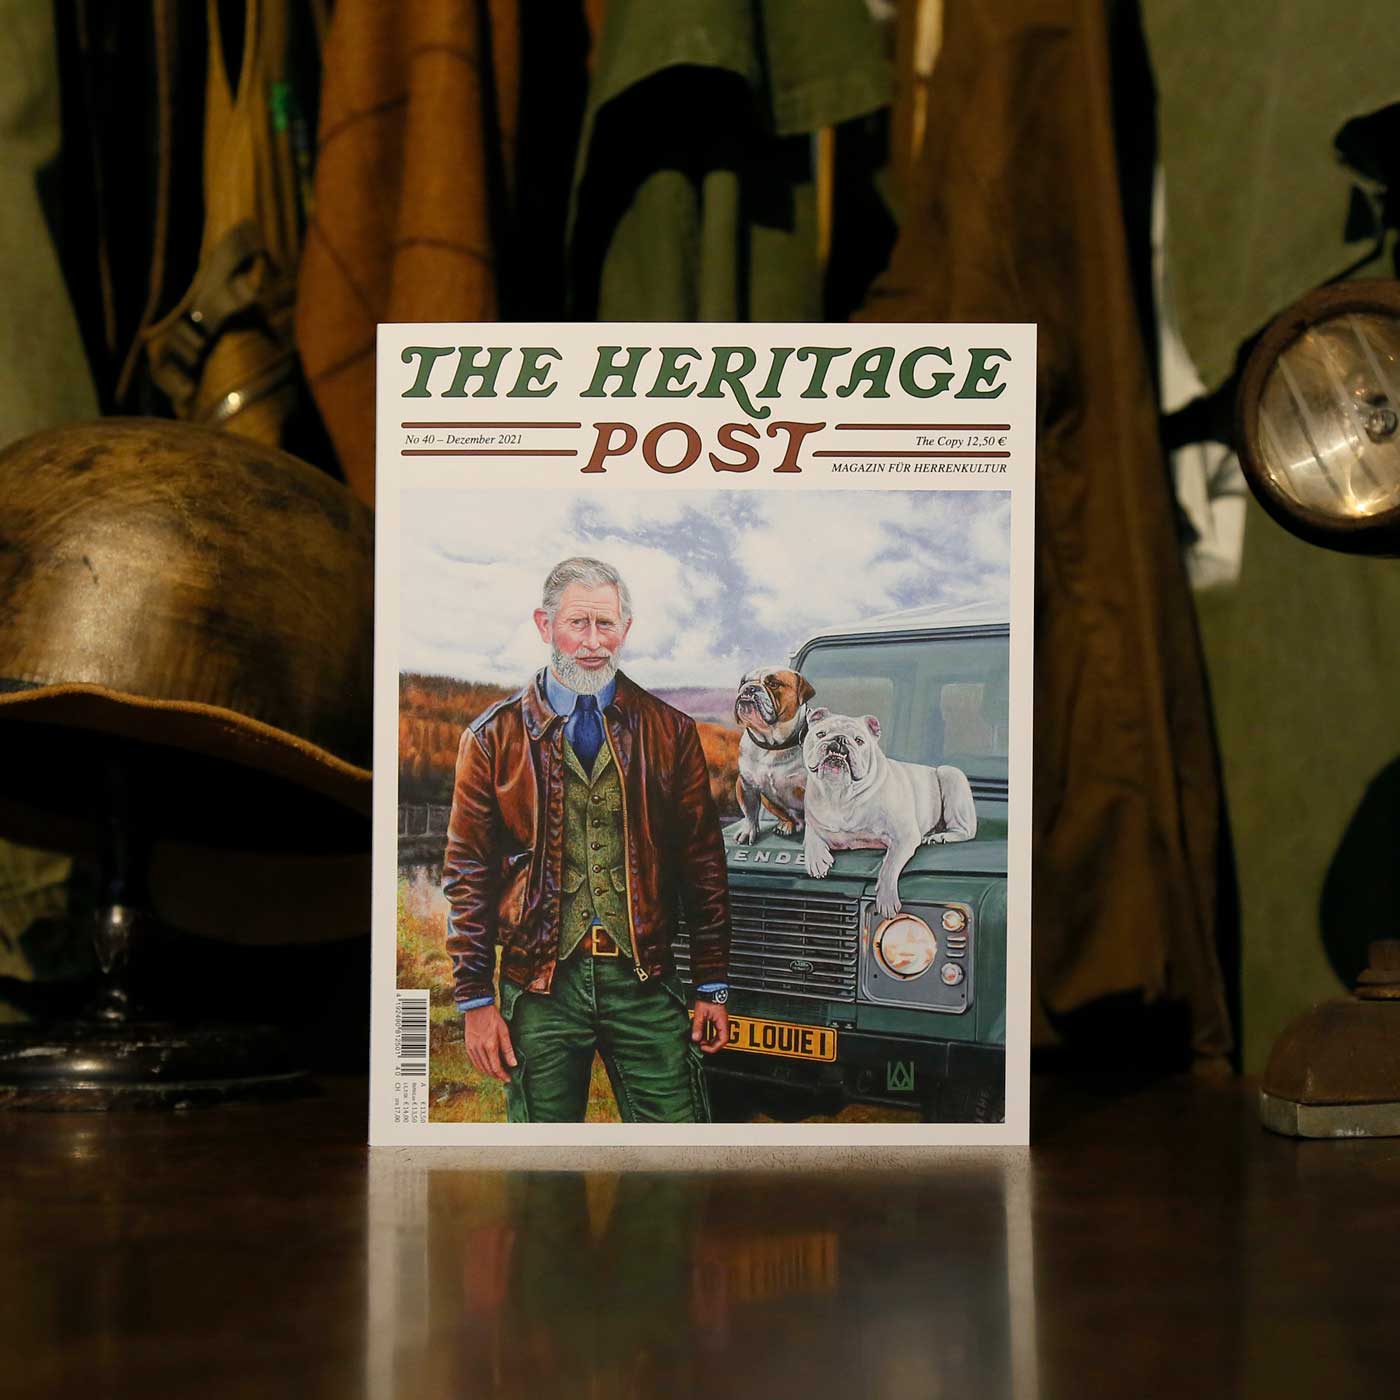 The Heritage Post